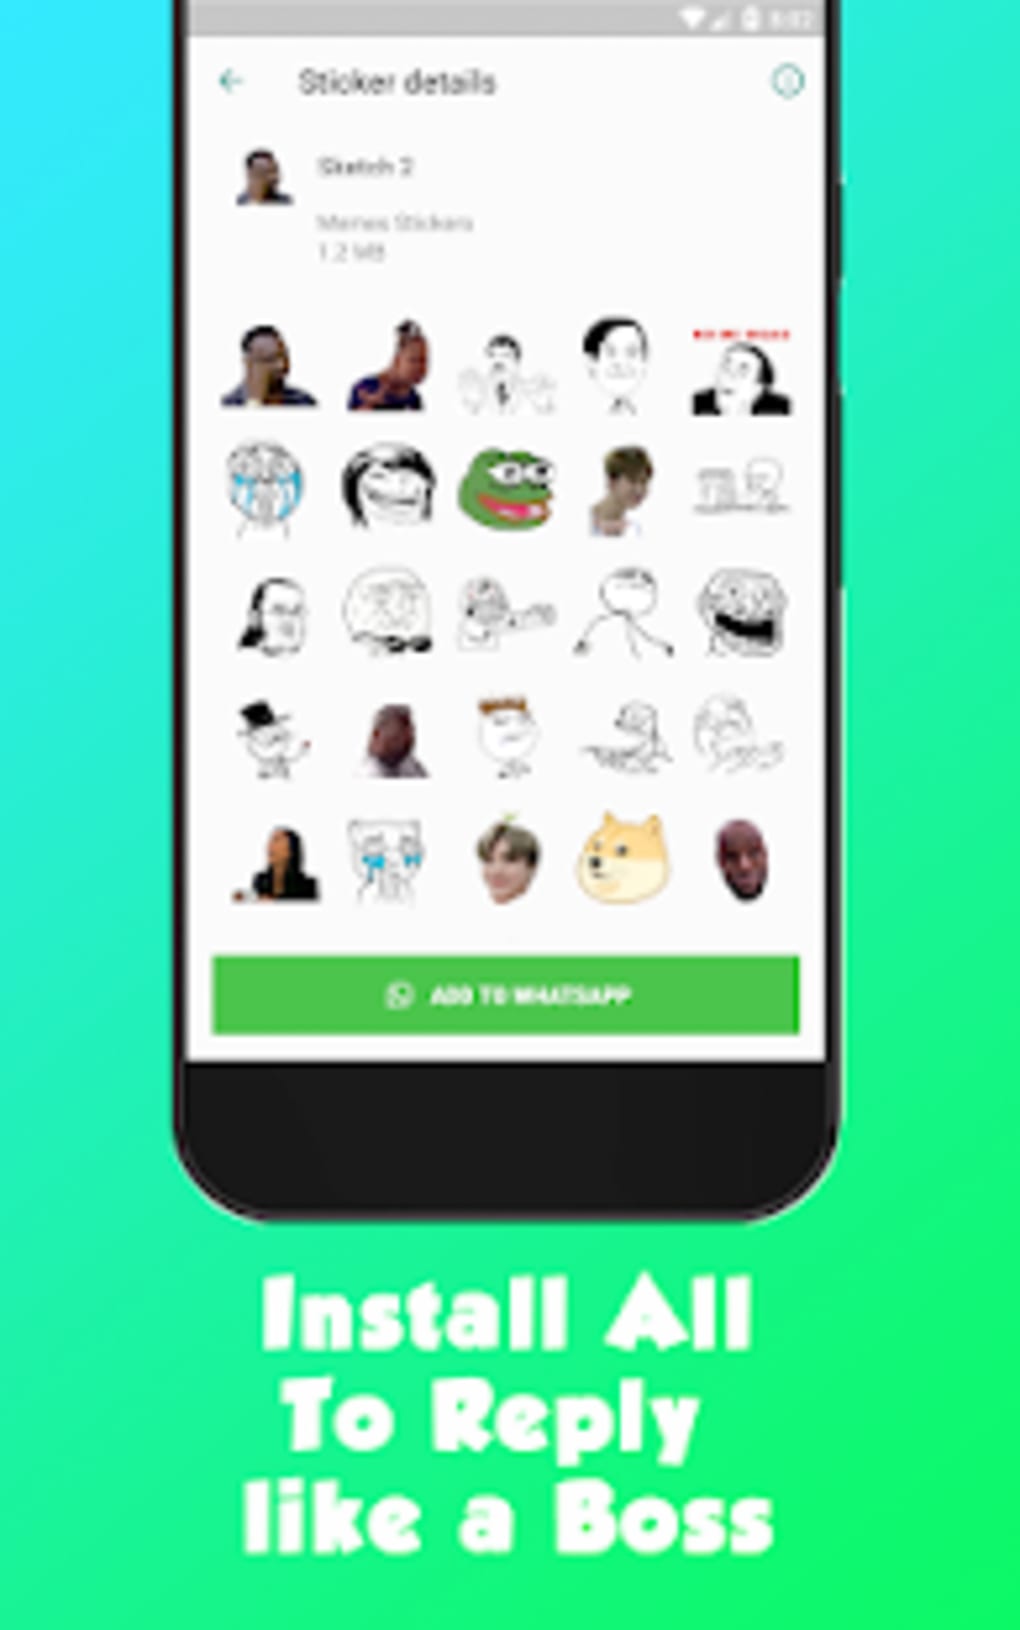 Meme Stickers for WhatsApp APK Download for Android Free